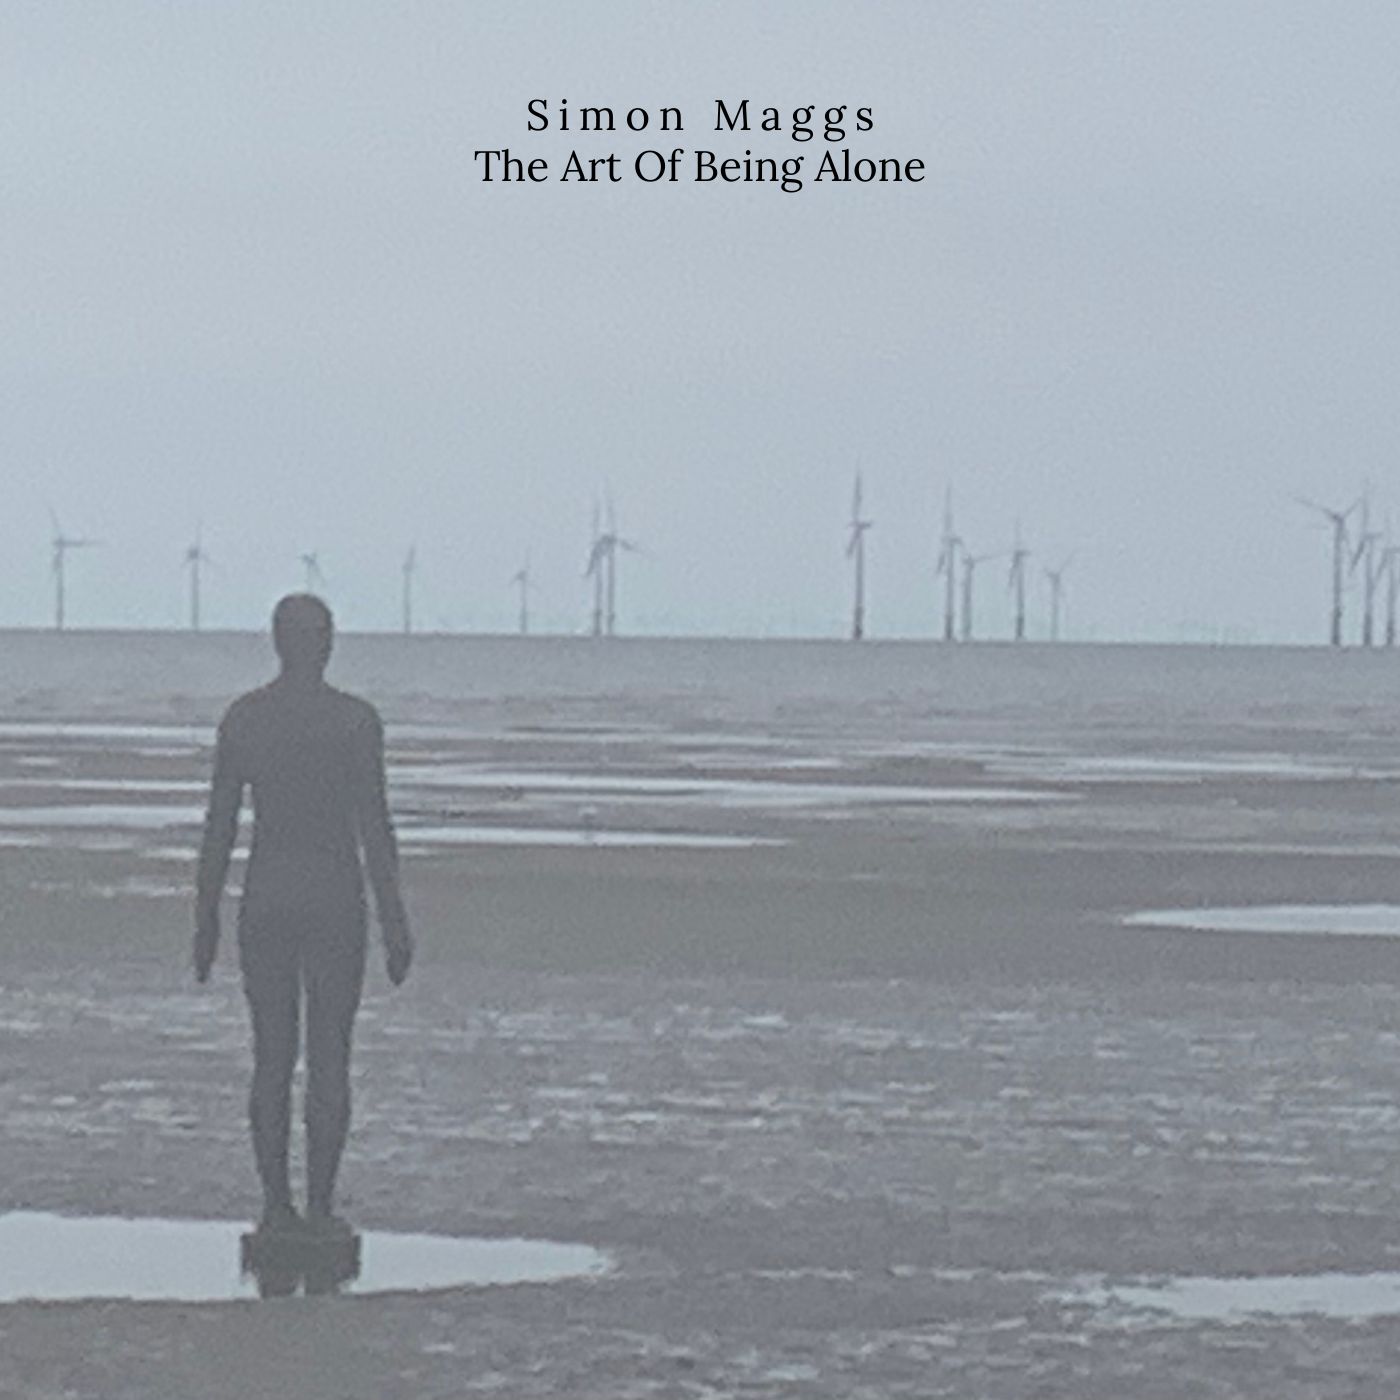 The Art of Being Alone by Simon Maggs, cover artwork.